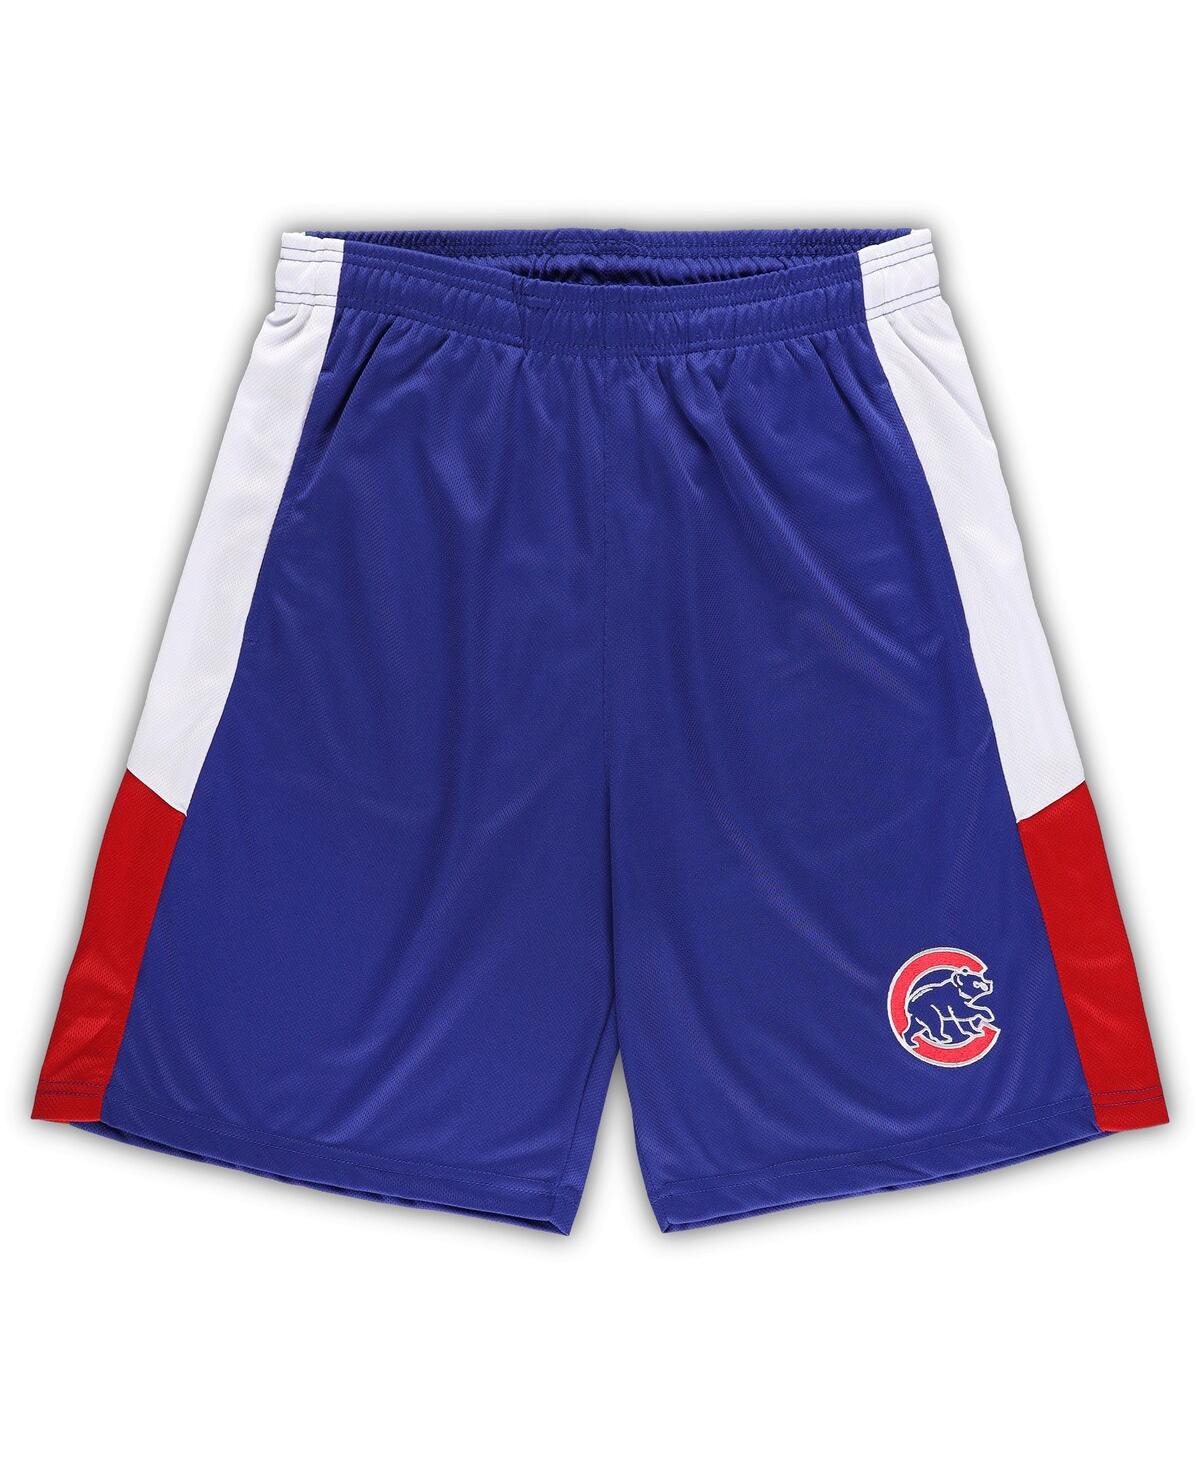 PROFILE MEN'S ROYAL CHICAGO CUBS BIG AND TALL TEAM SHORTS